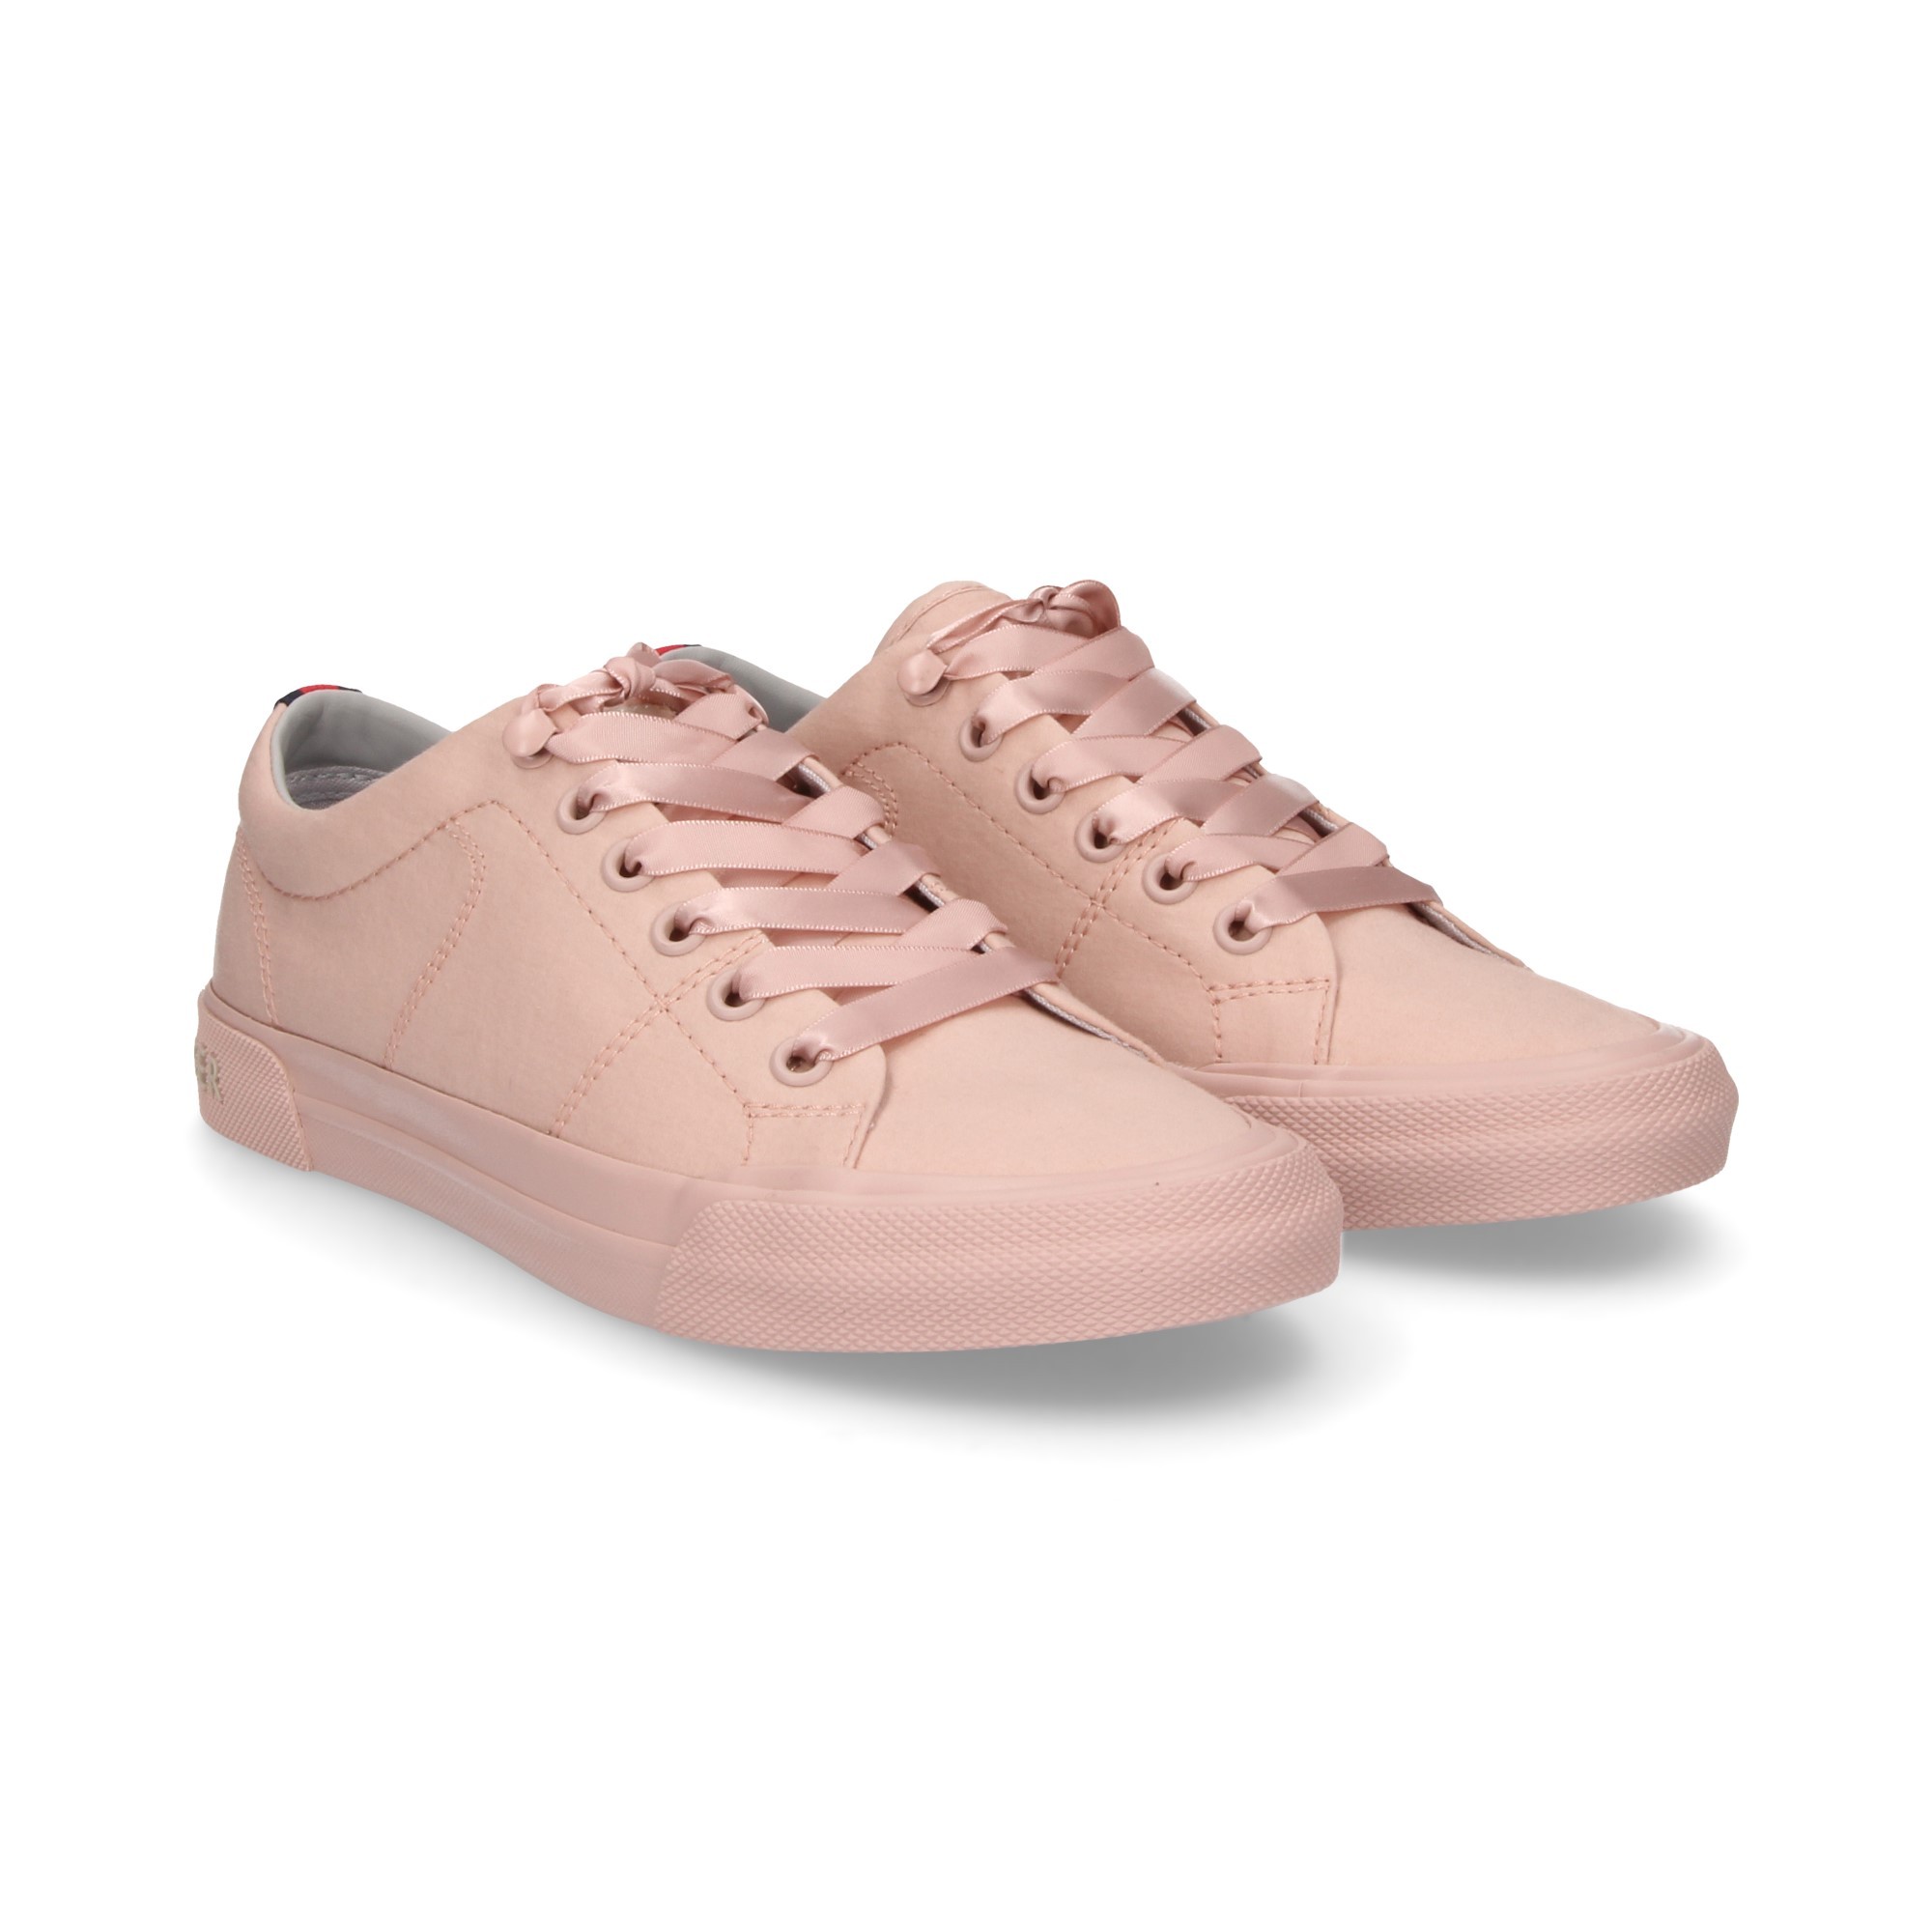 dusty rose tennis shoes